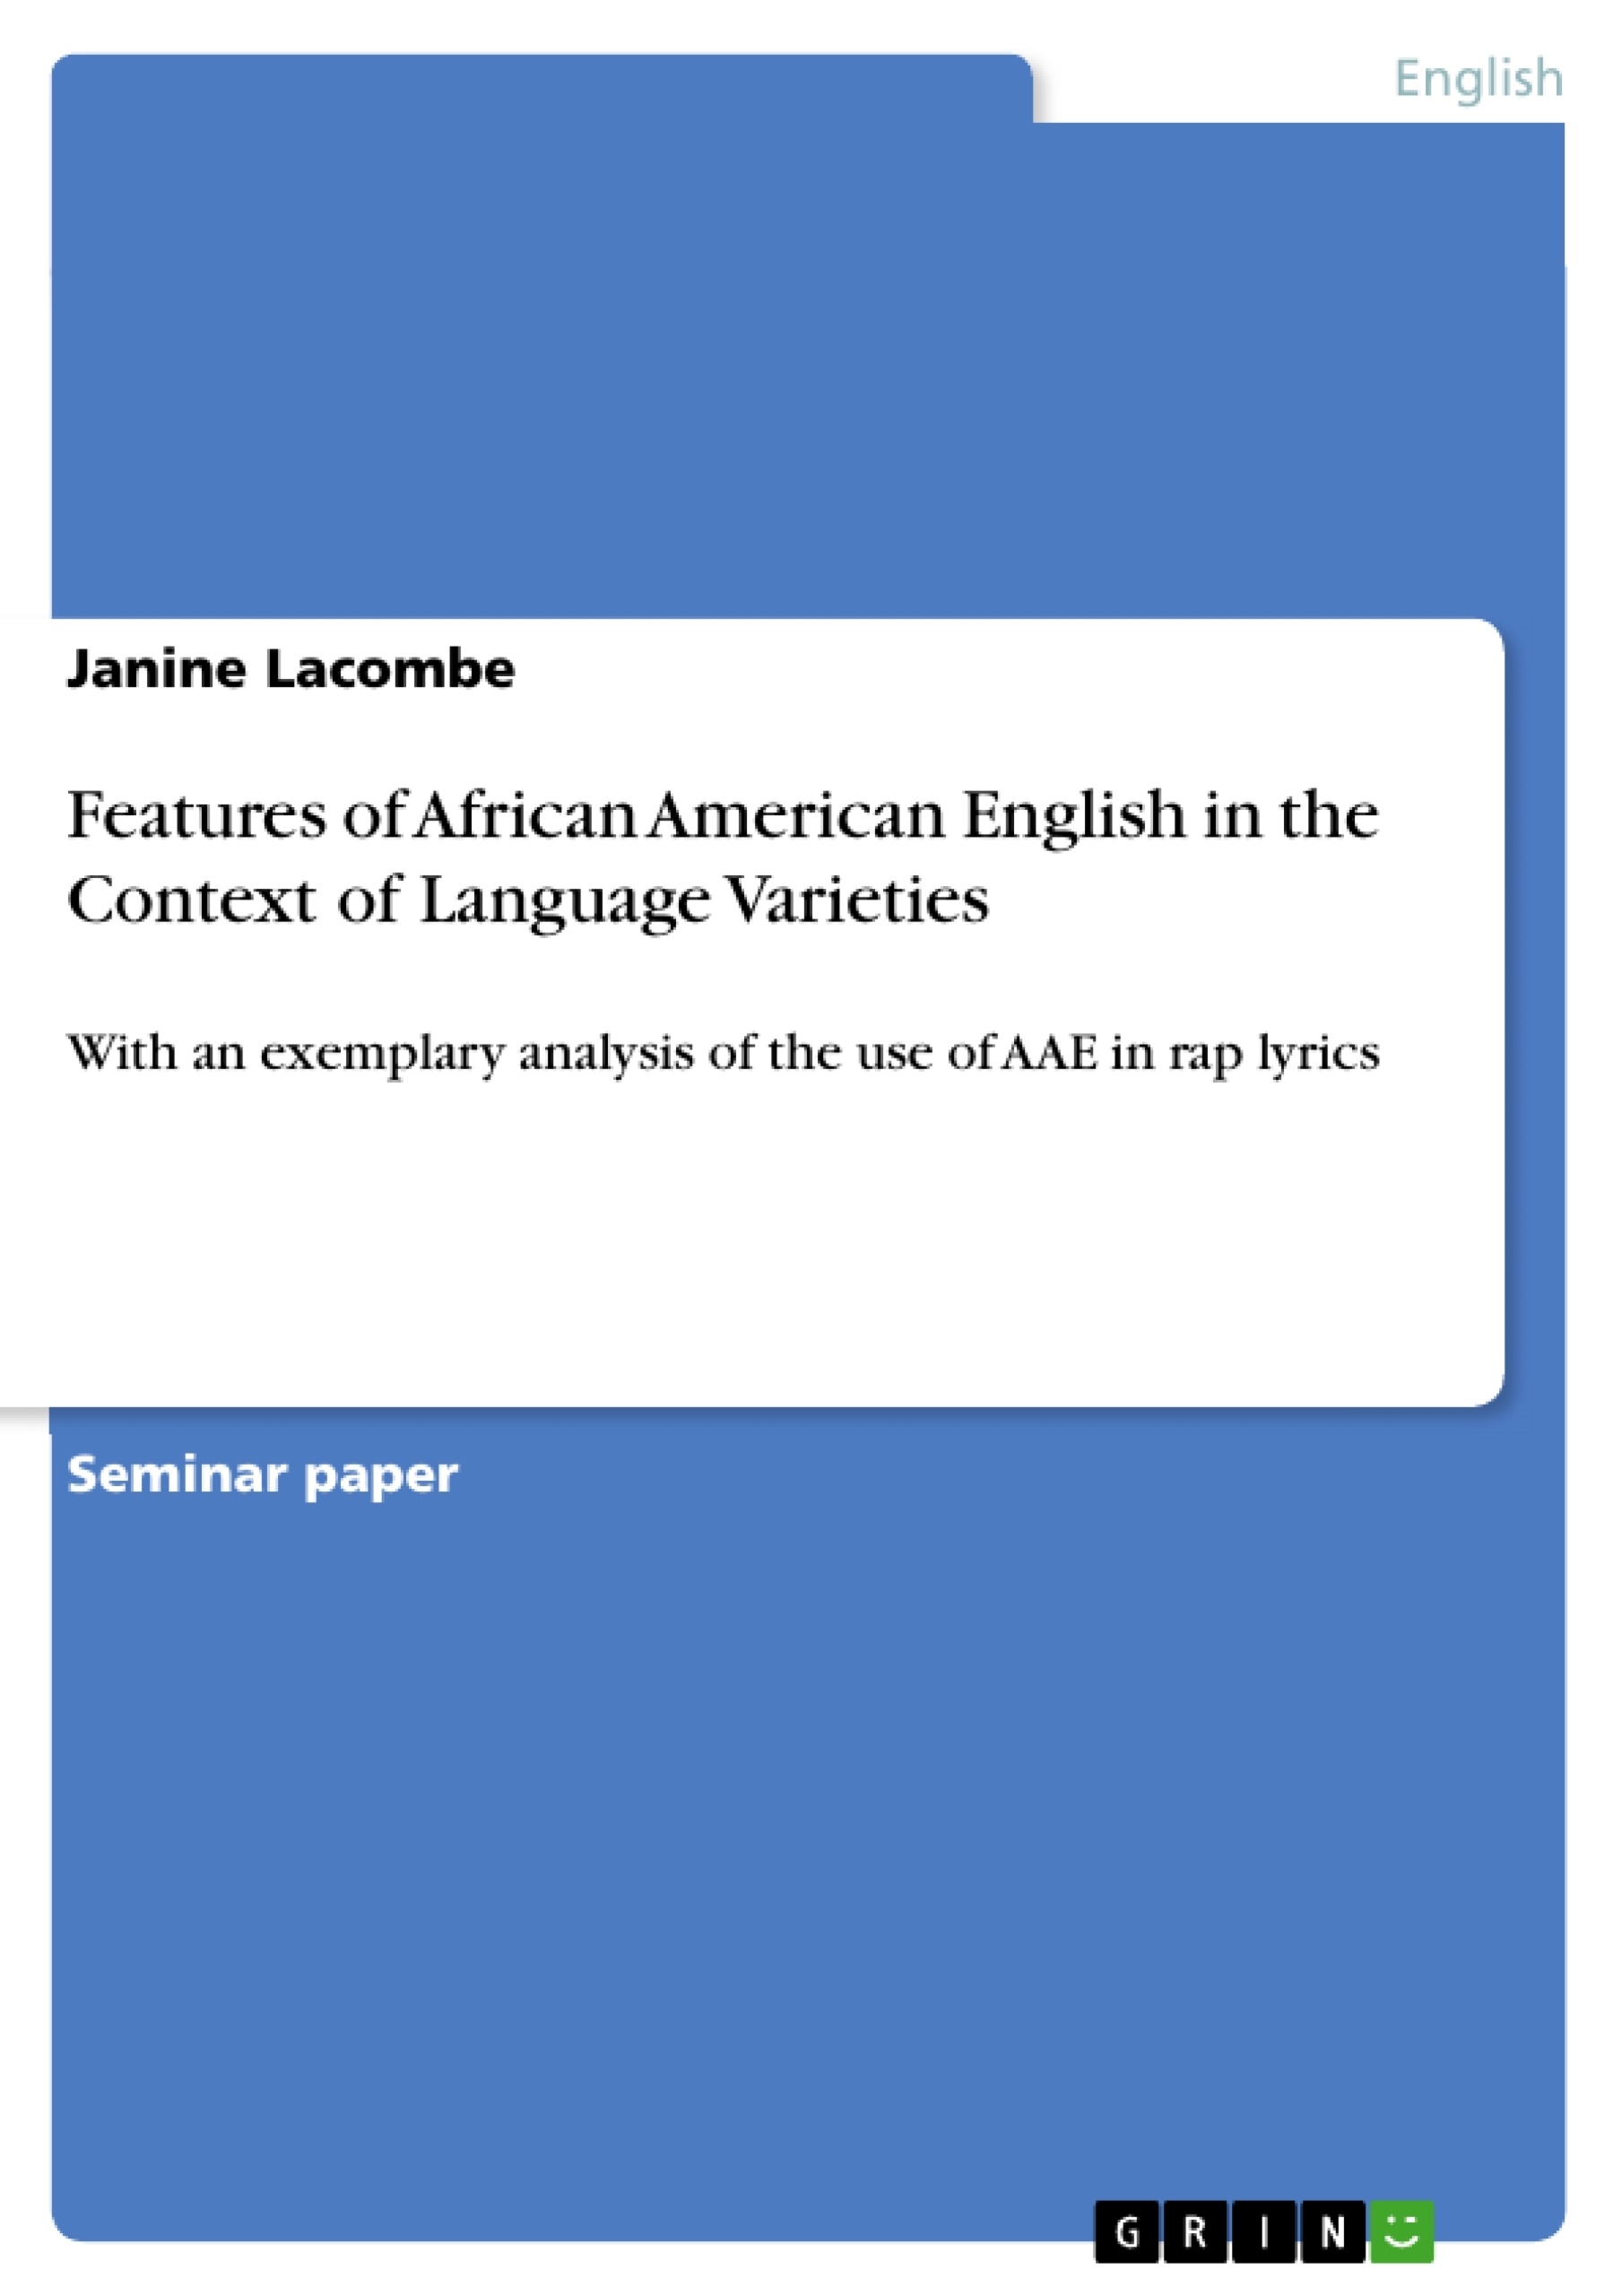 Title: Features of African American English in the Context of Language Varieties